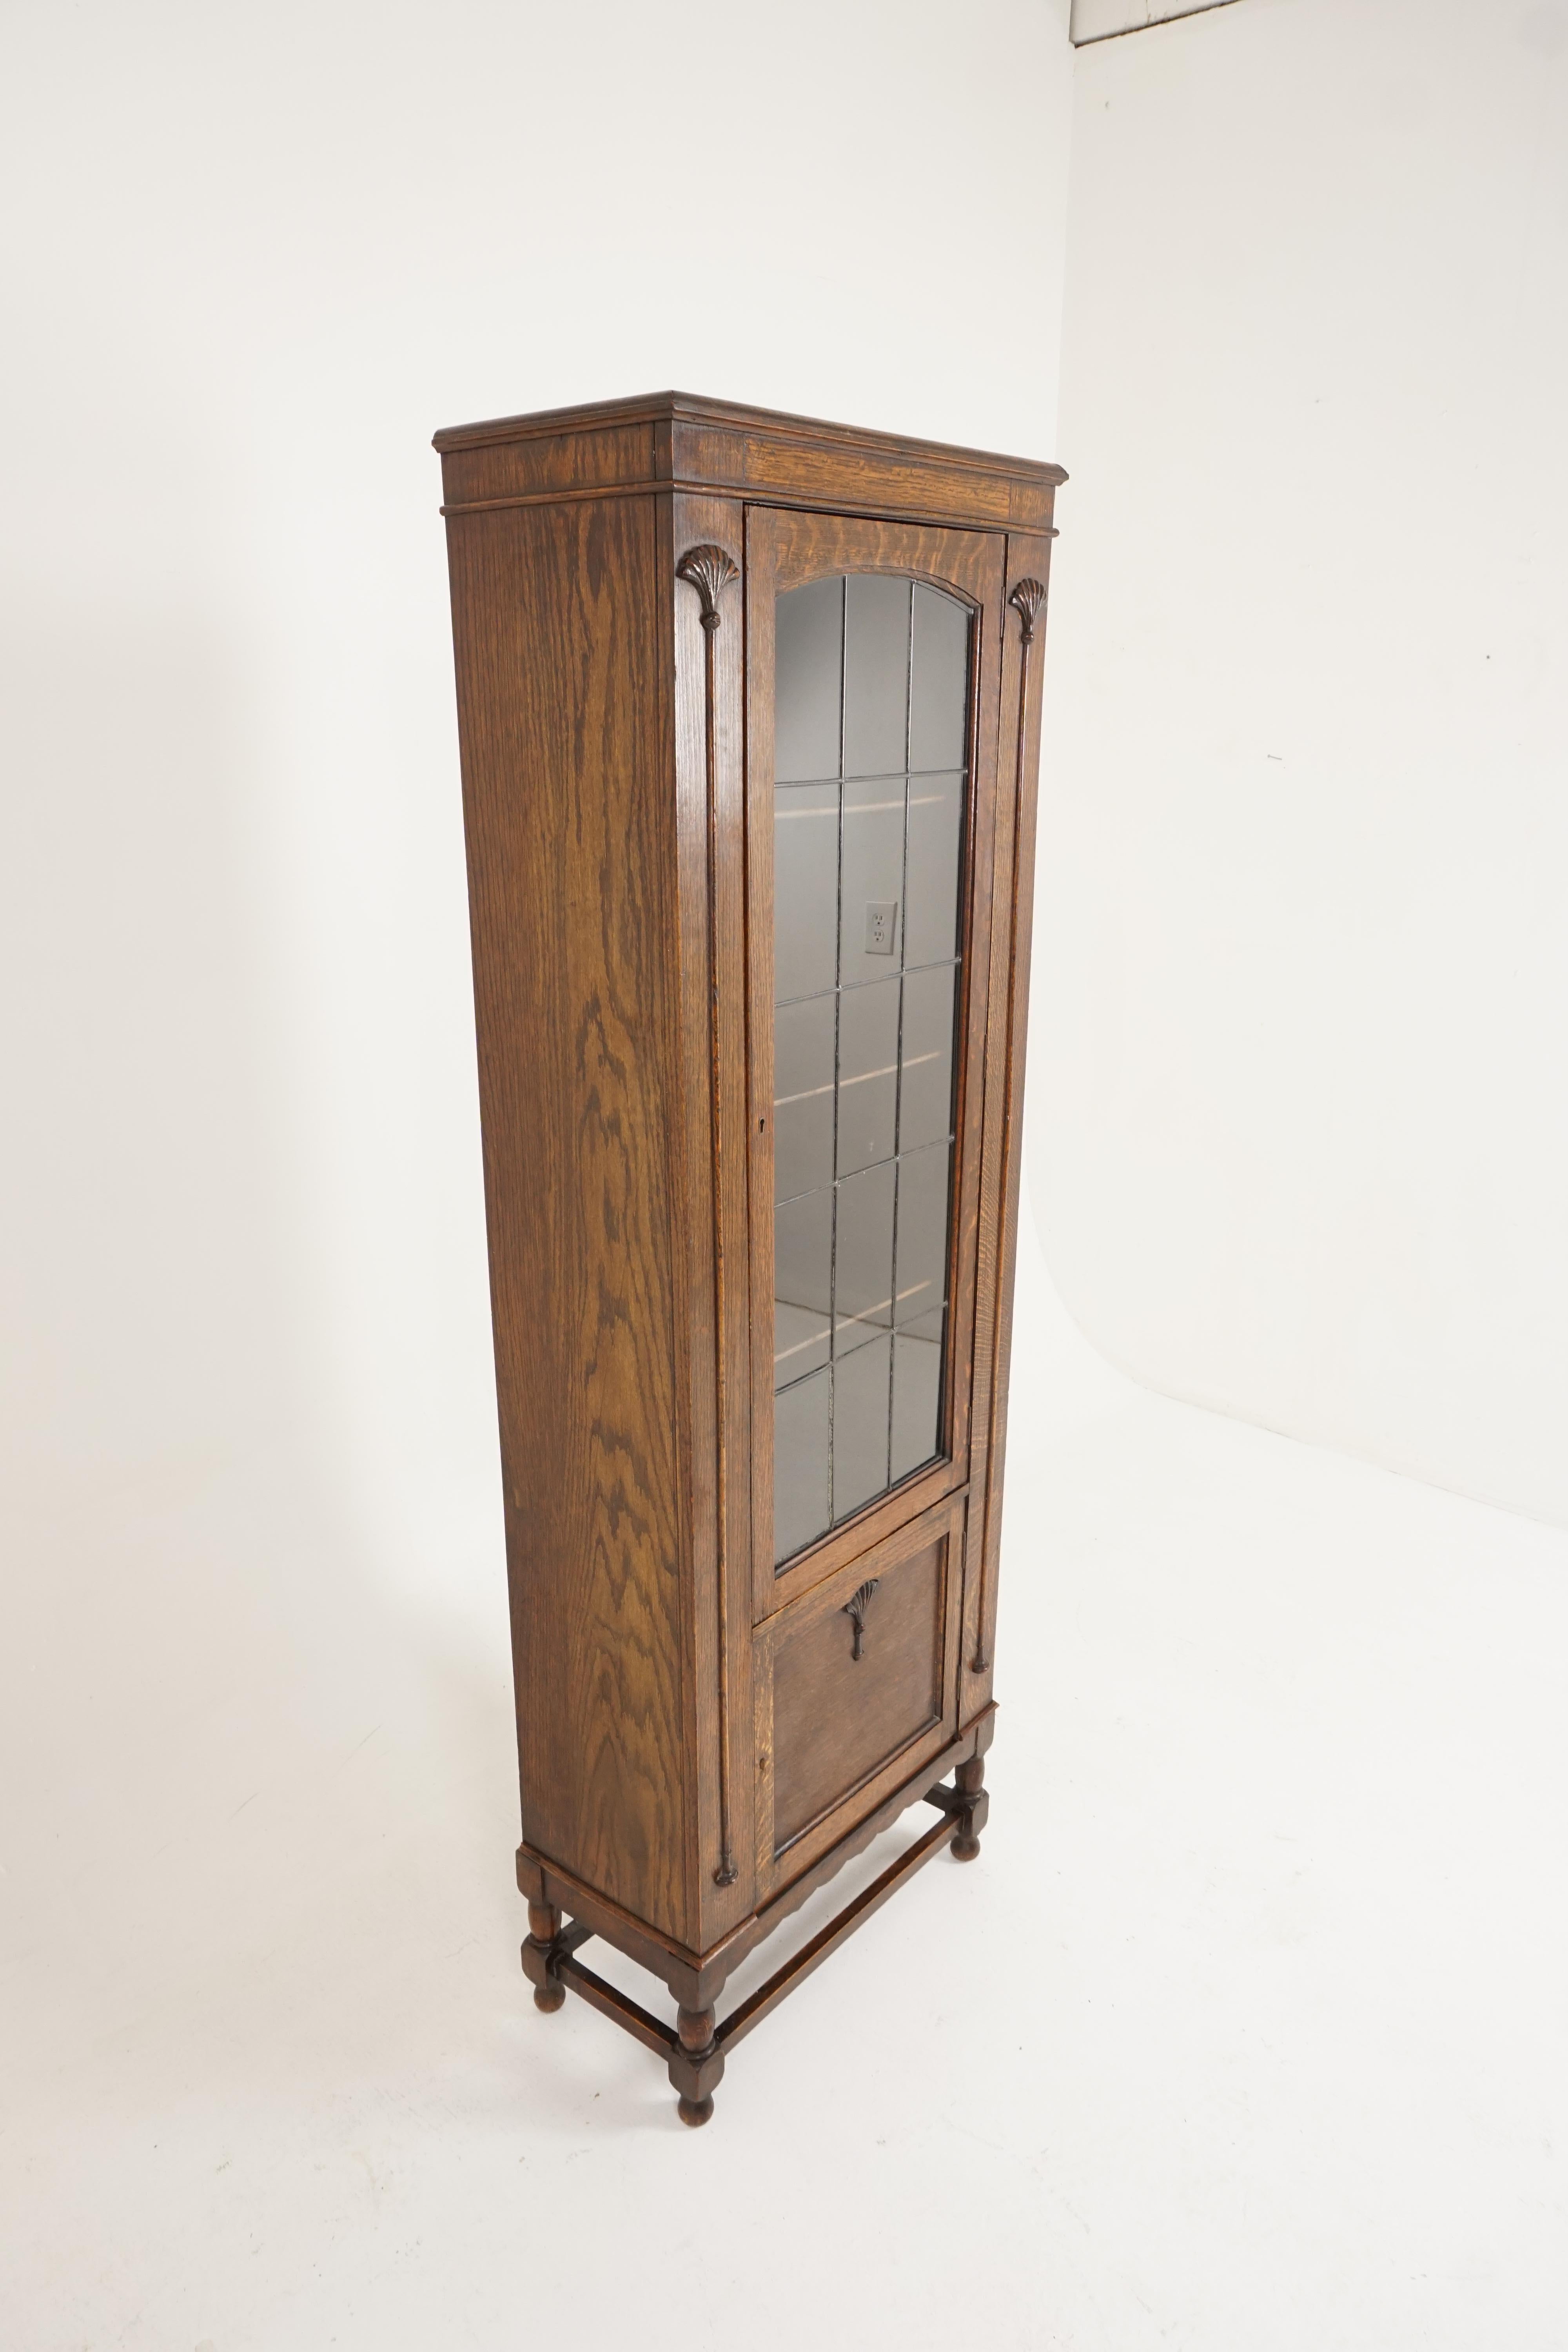 Hand-Crafted Antique Leaded Glass Bookcase, Tiger Oak Display Cabinet, Scotland 1920, B2175